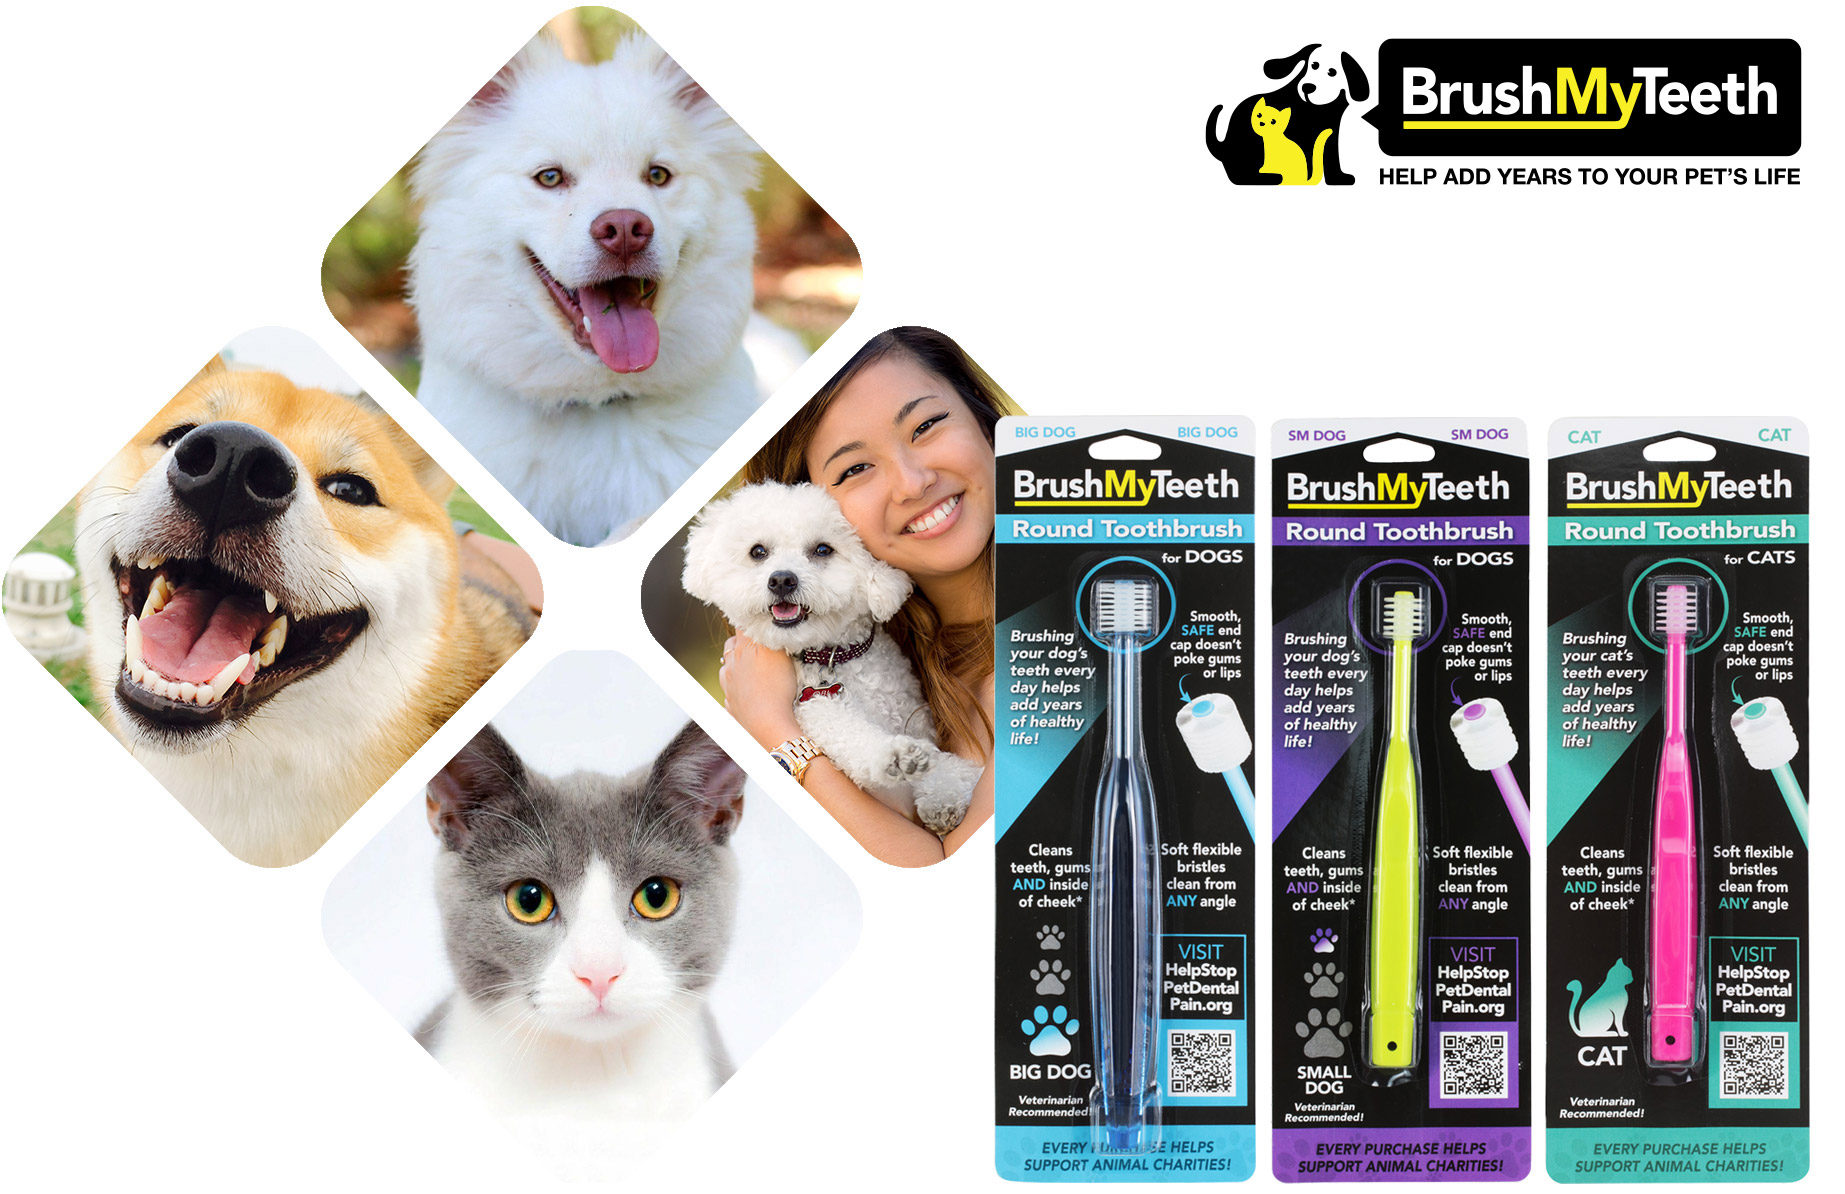 Brush My Teeth - Help Add Years to Your Pet's Life